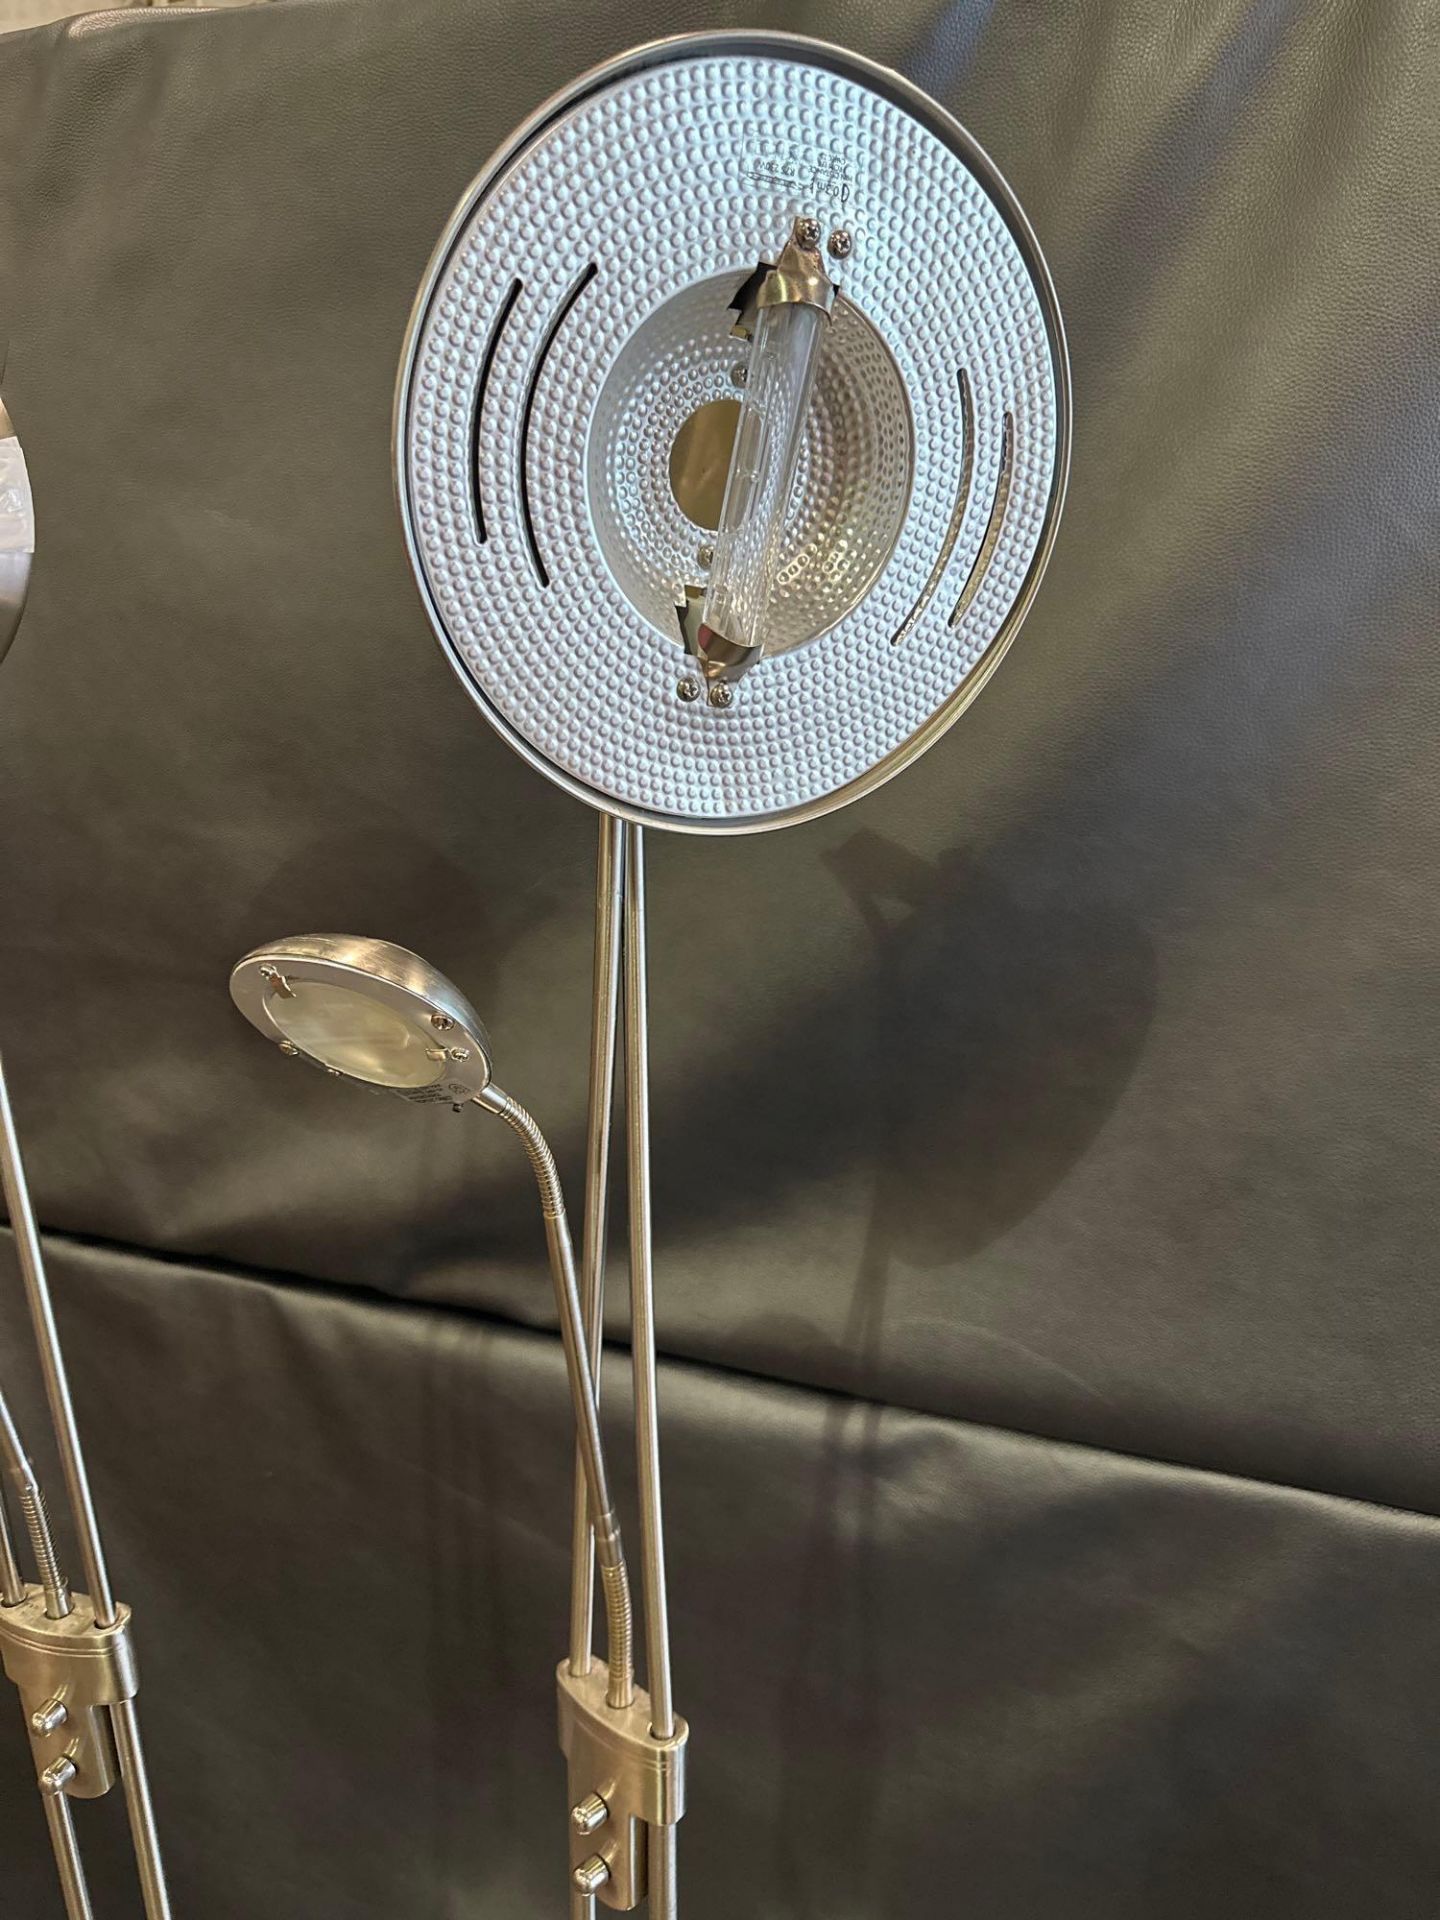 Levity LED Uplighter Floor Lamp, Antique Brass Add A Touch Of Contemporary Style To Your Home With - Image 4 of 6